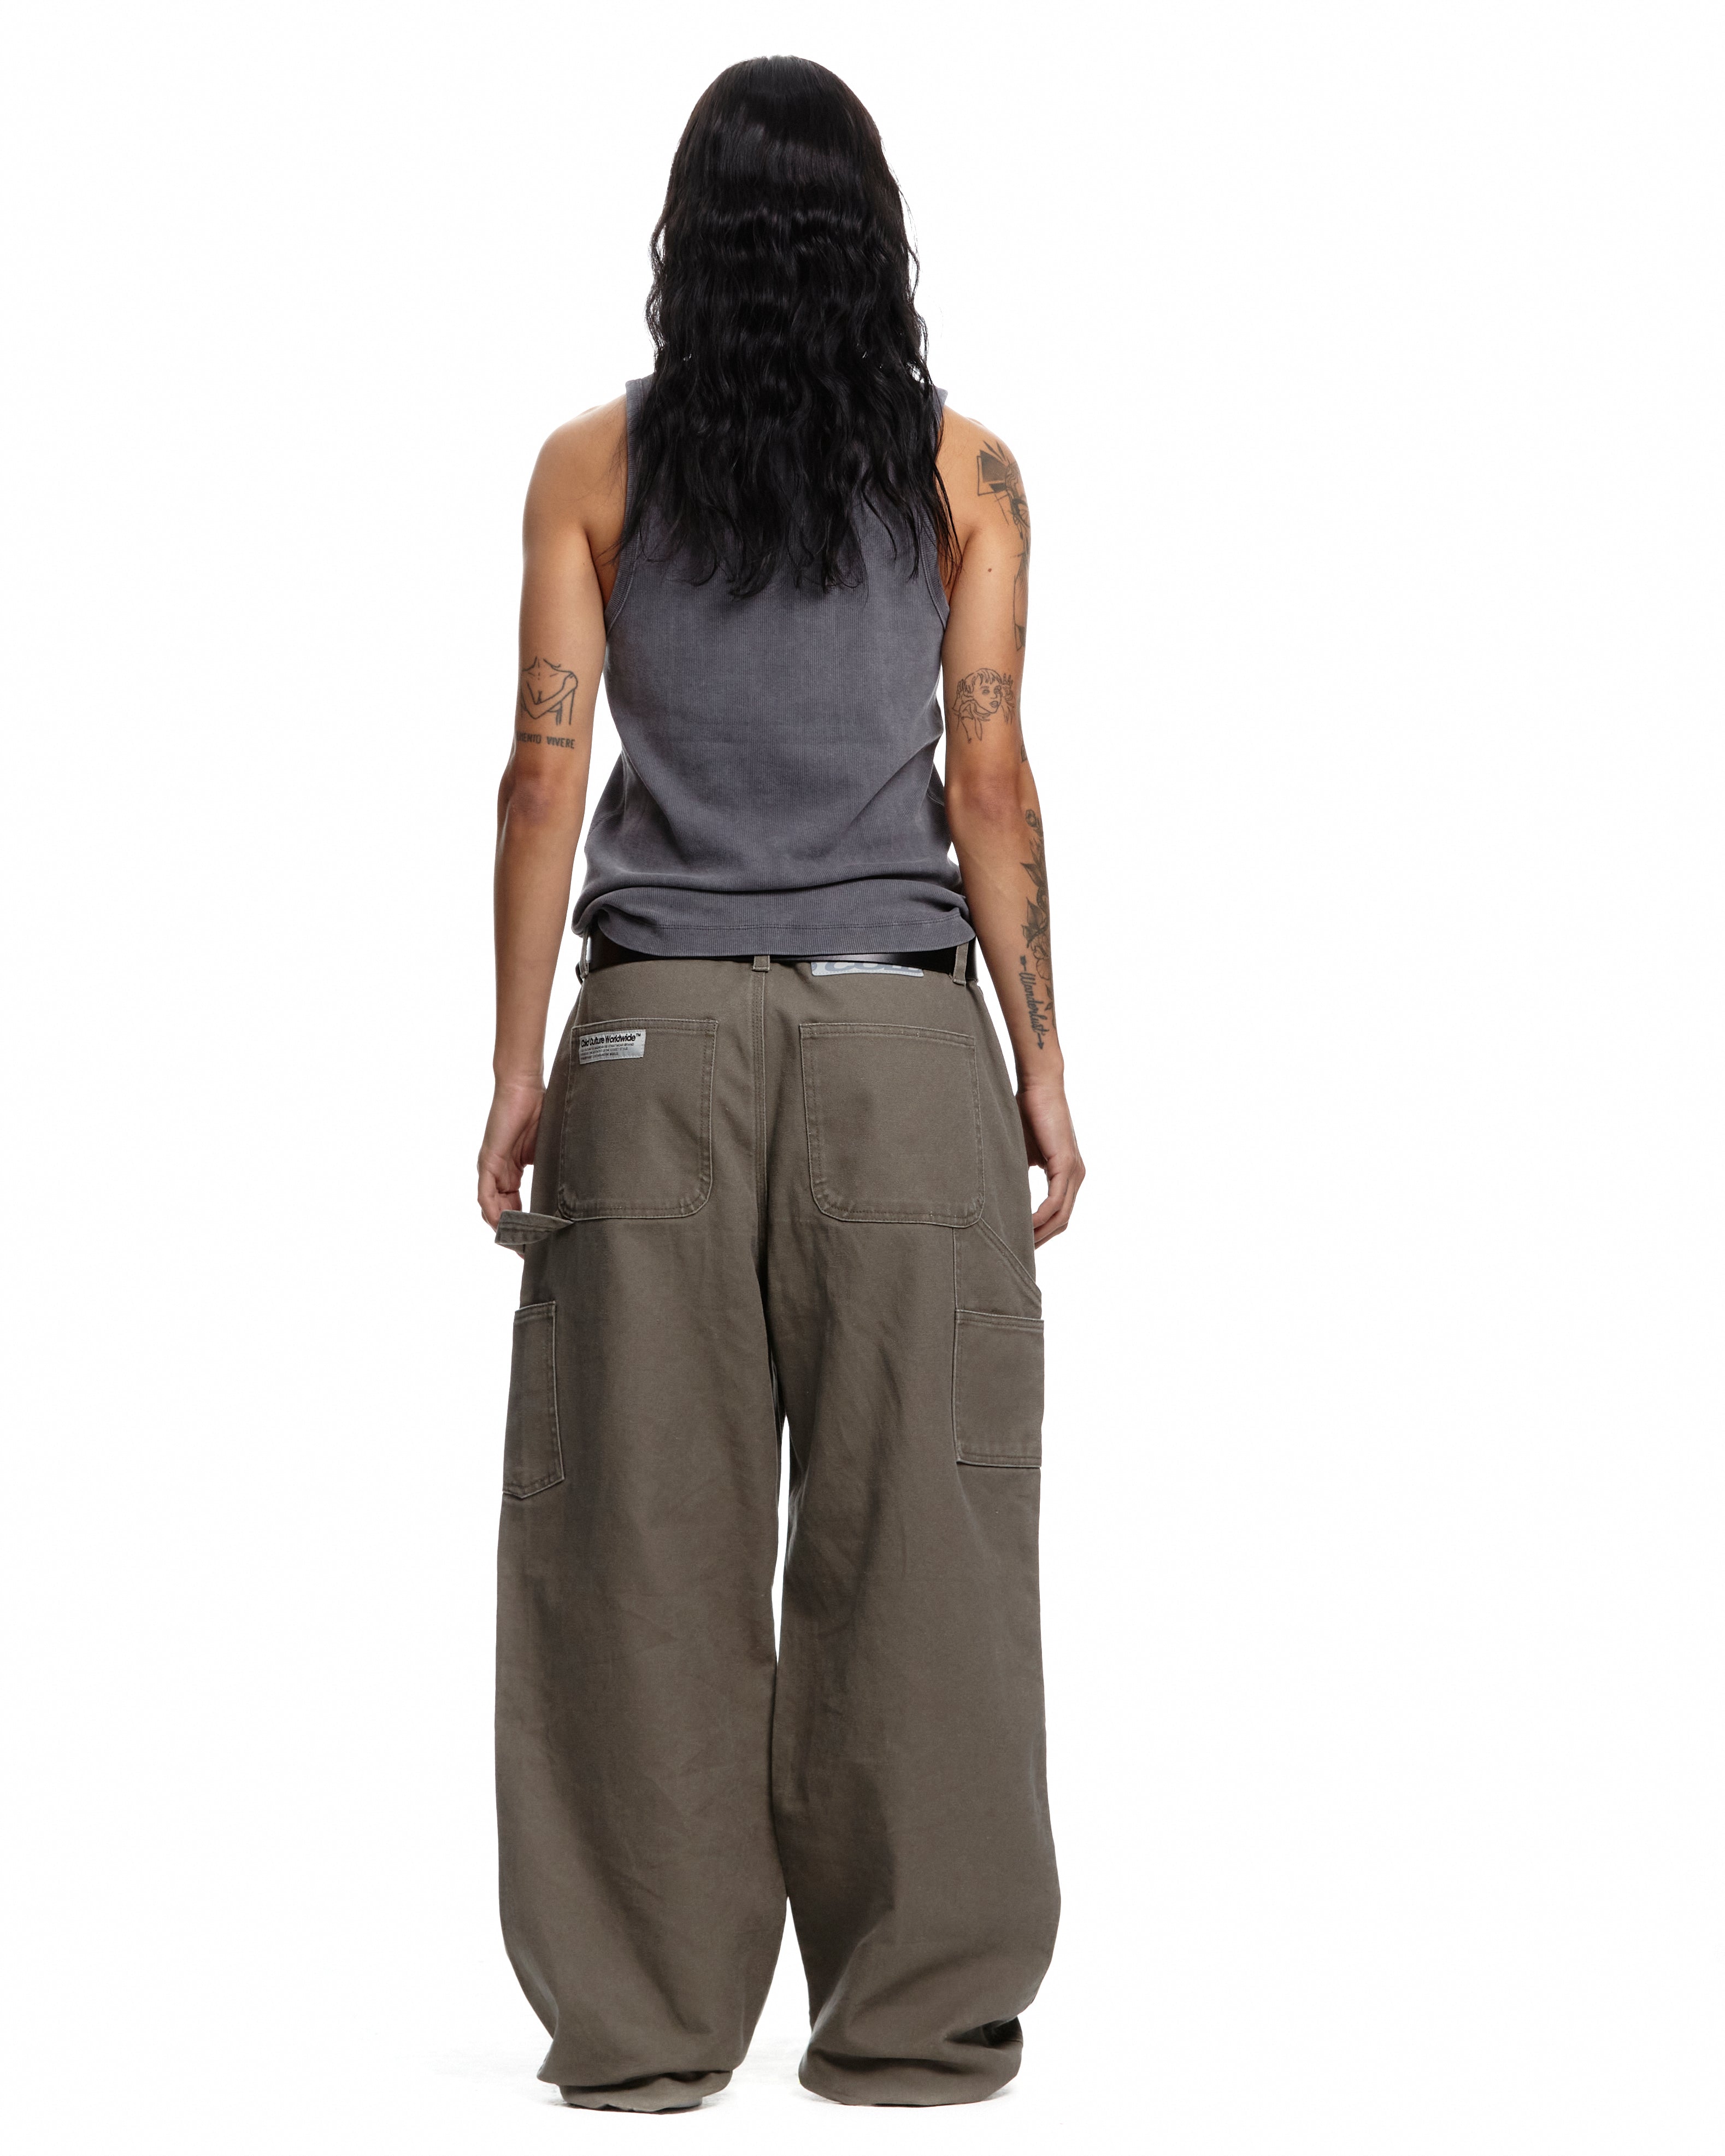 V1 DOUBLE KNEE PANTS STONE-WASHED MOLE BROWN